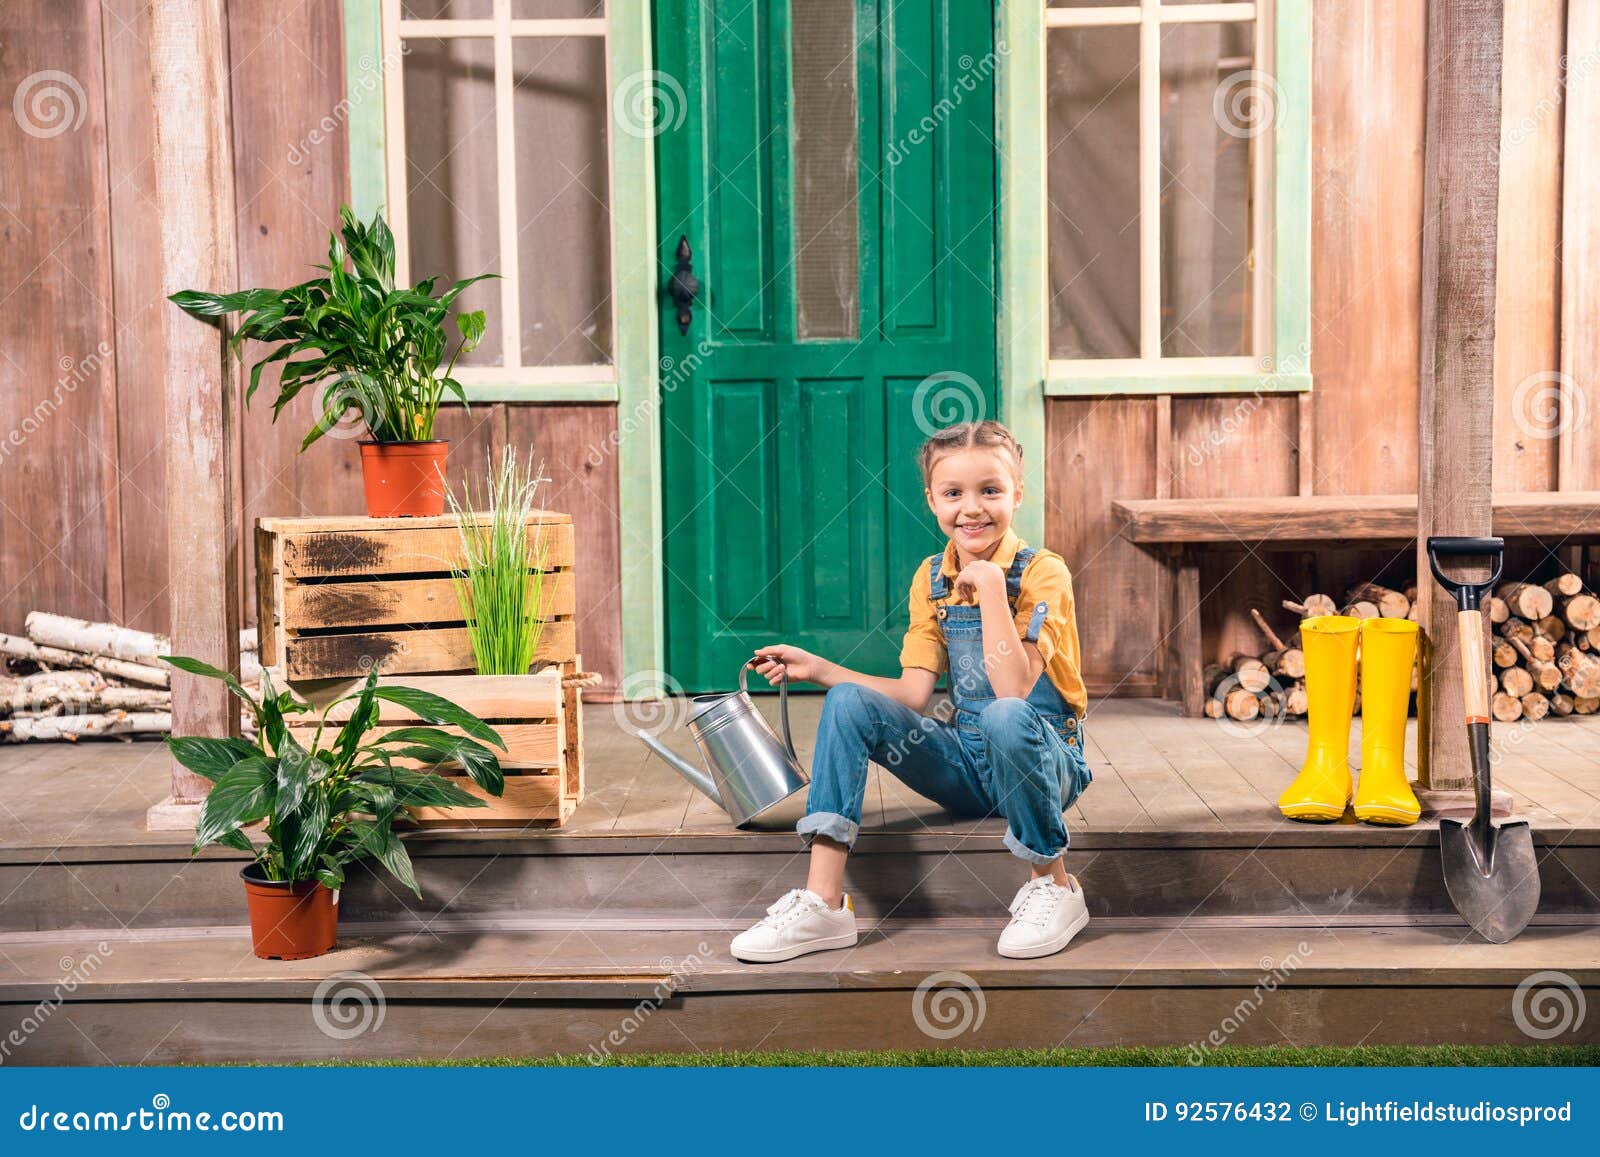 Little Girl In A Hat Sits On The Porch Of An Old Wooden House Stock Image - Image of beautiful 